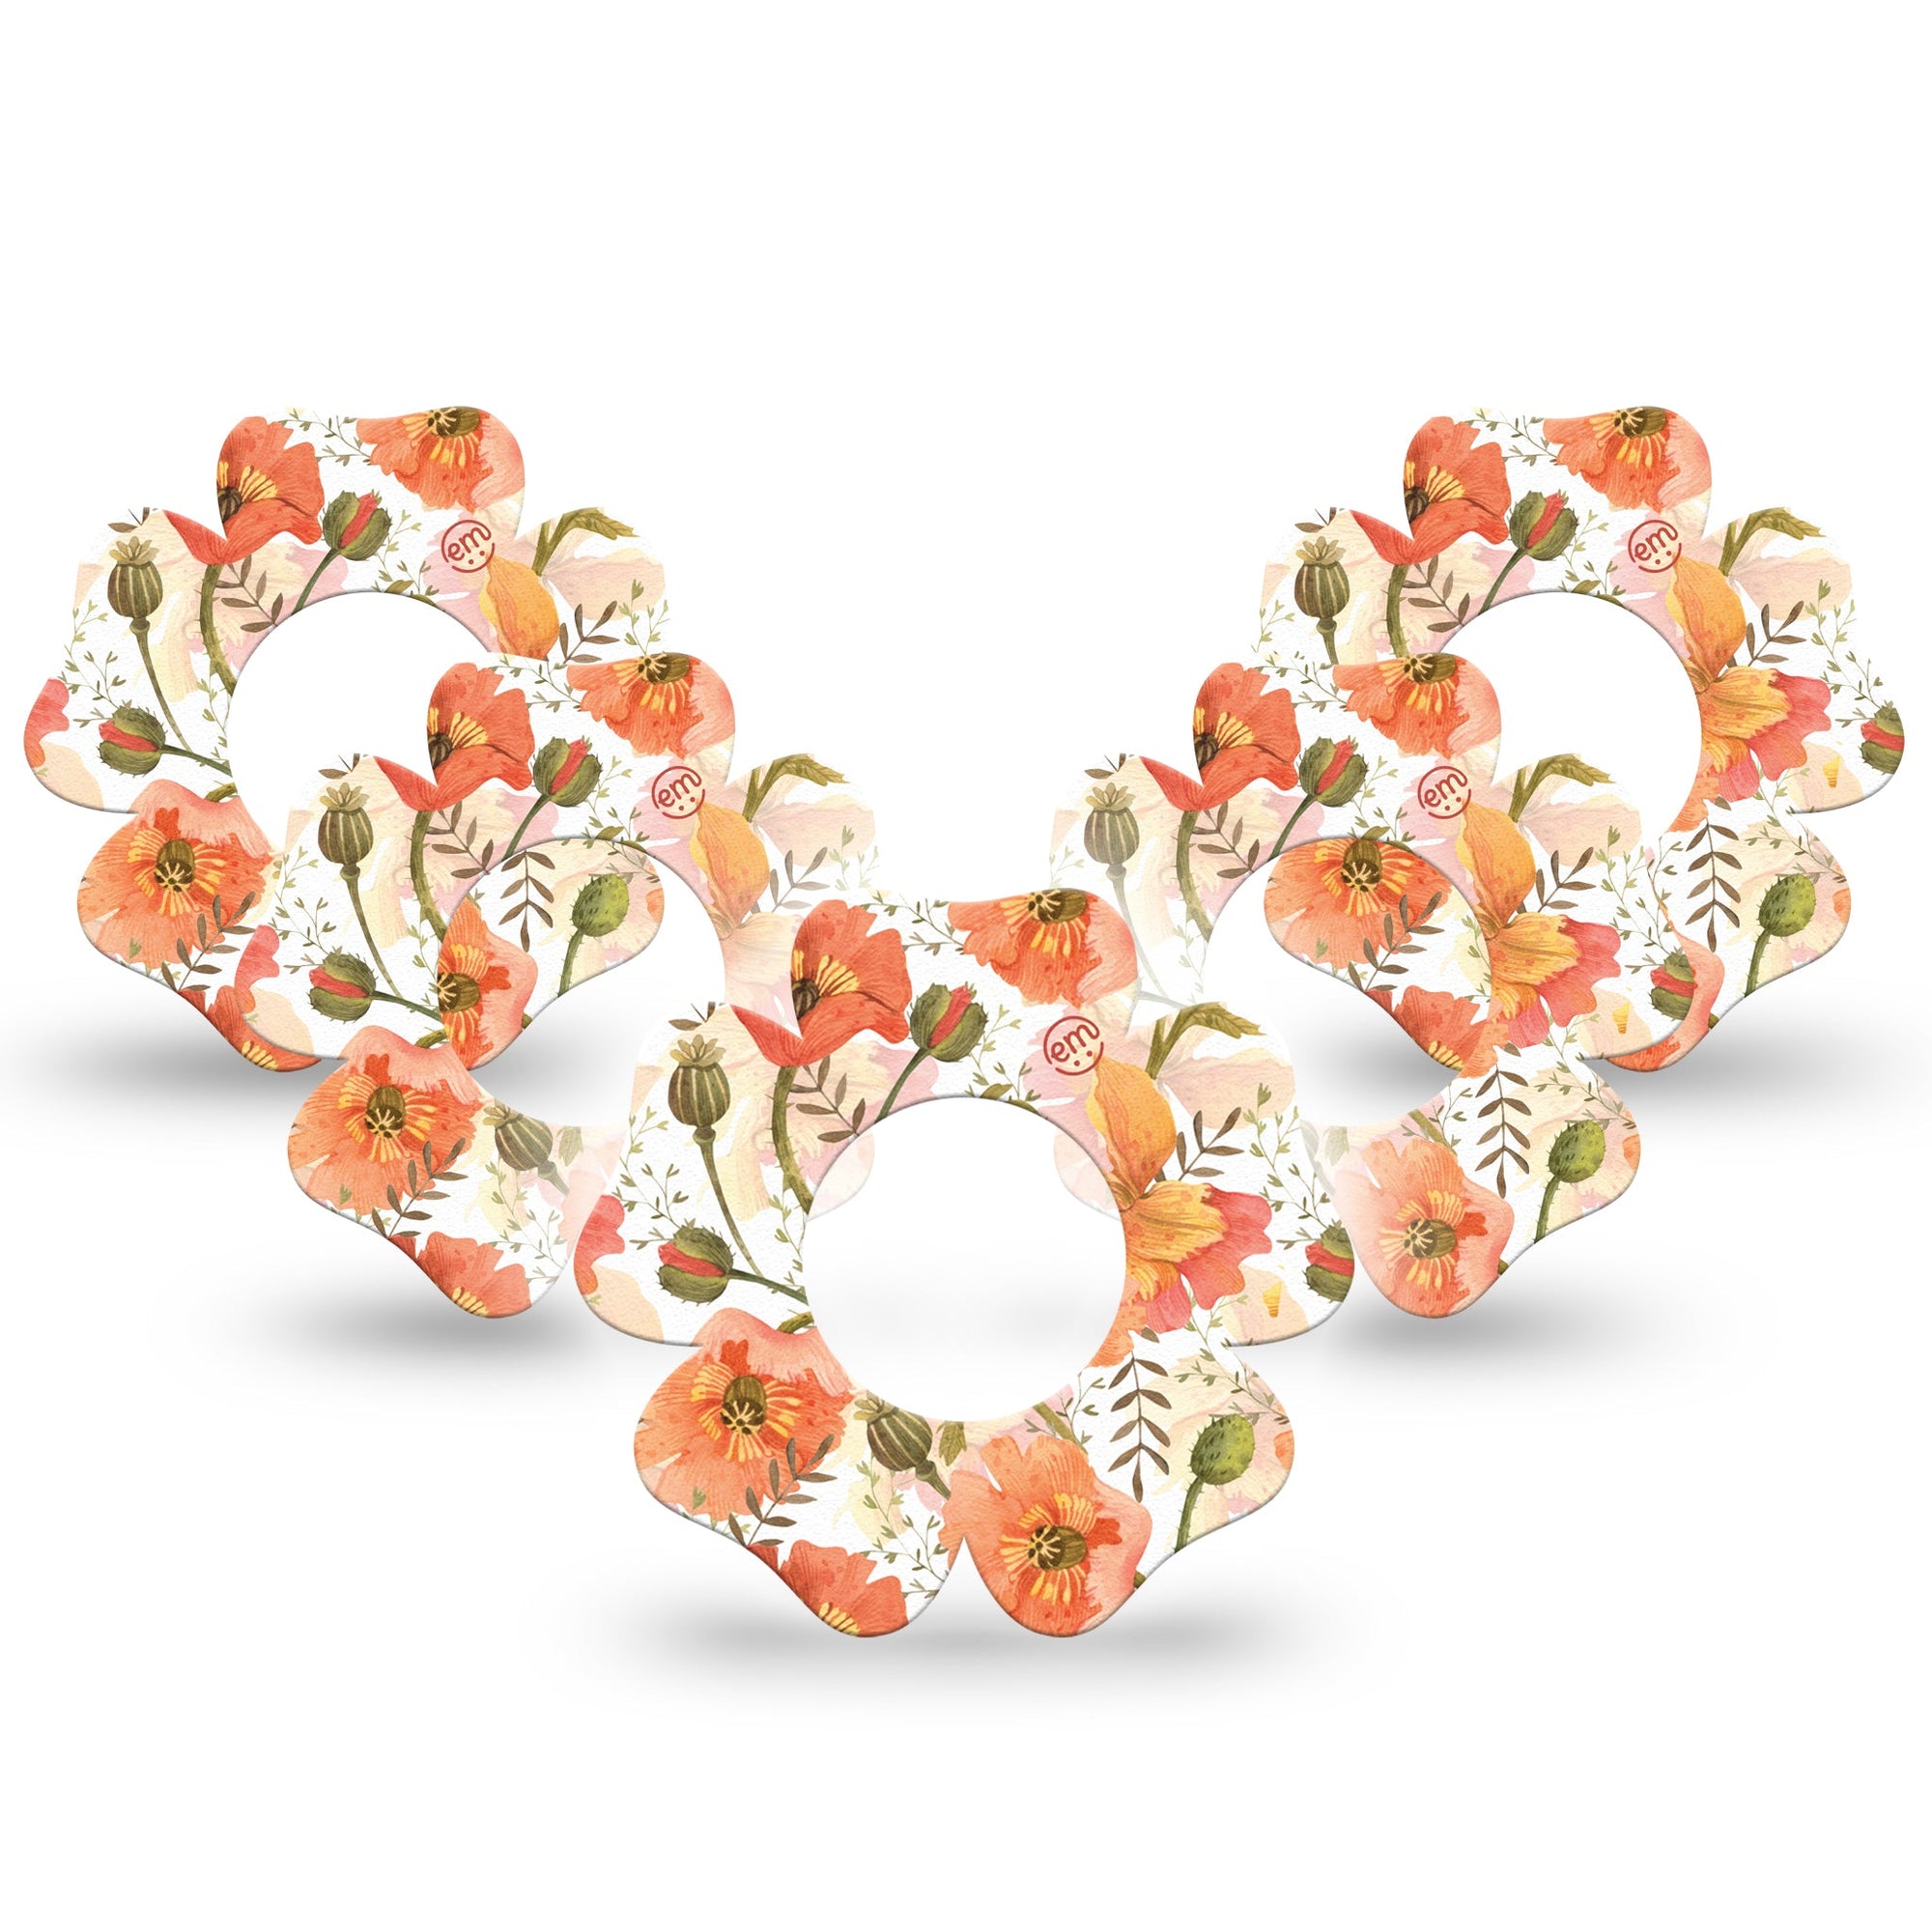 ExpressionMed Peachy Blooms Libre Flower Tape 5-Pack orange posies overlay design